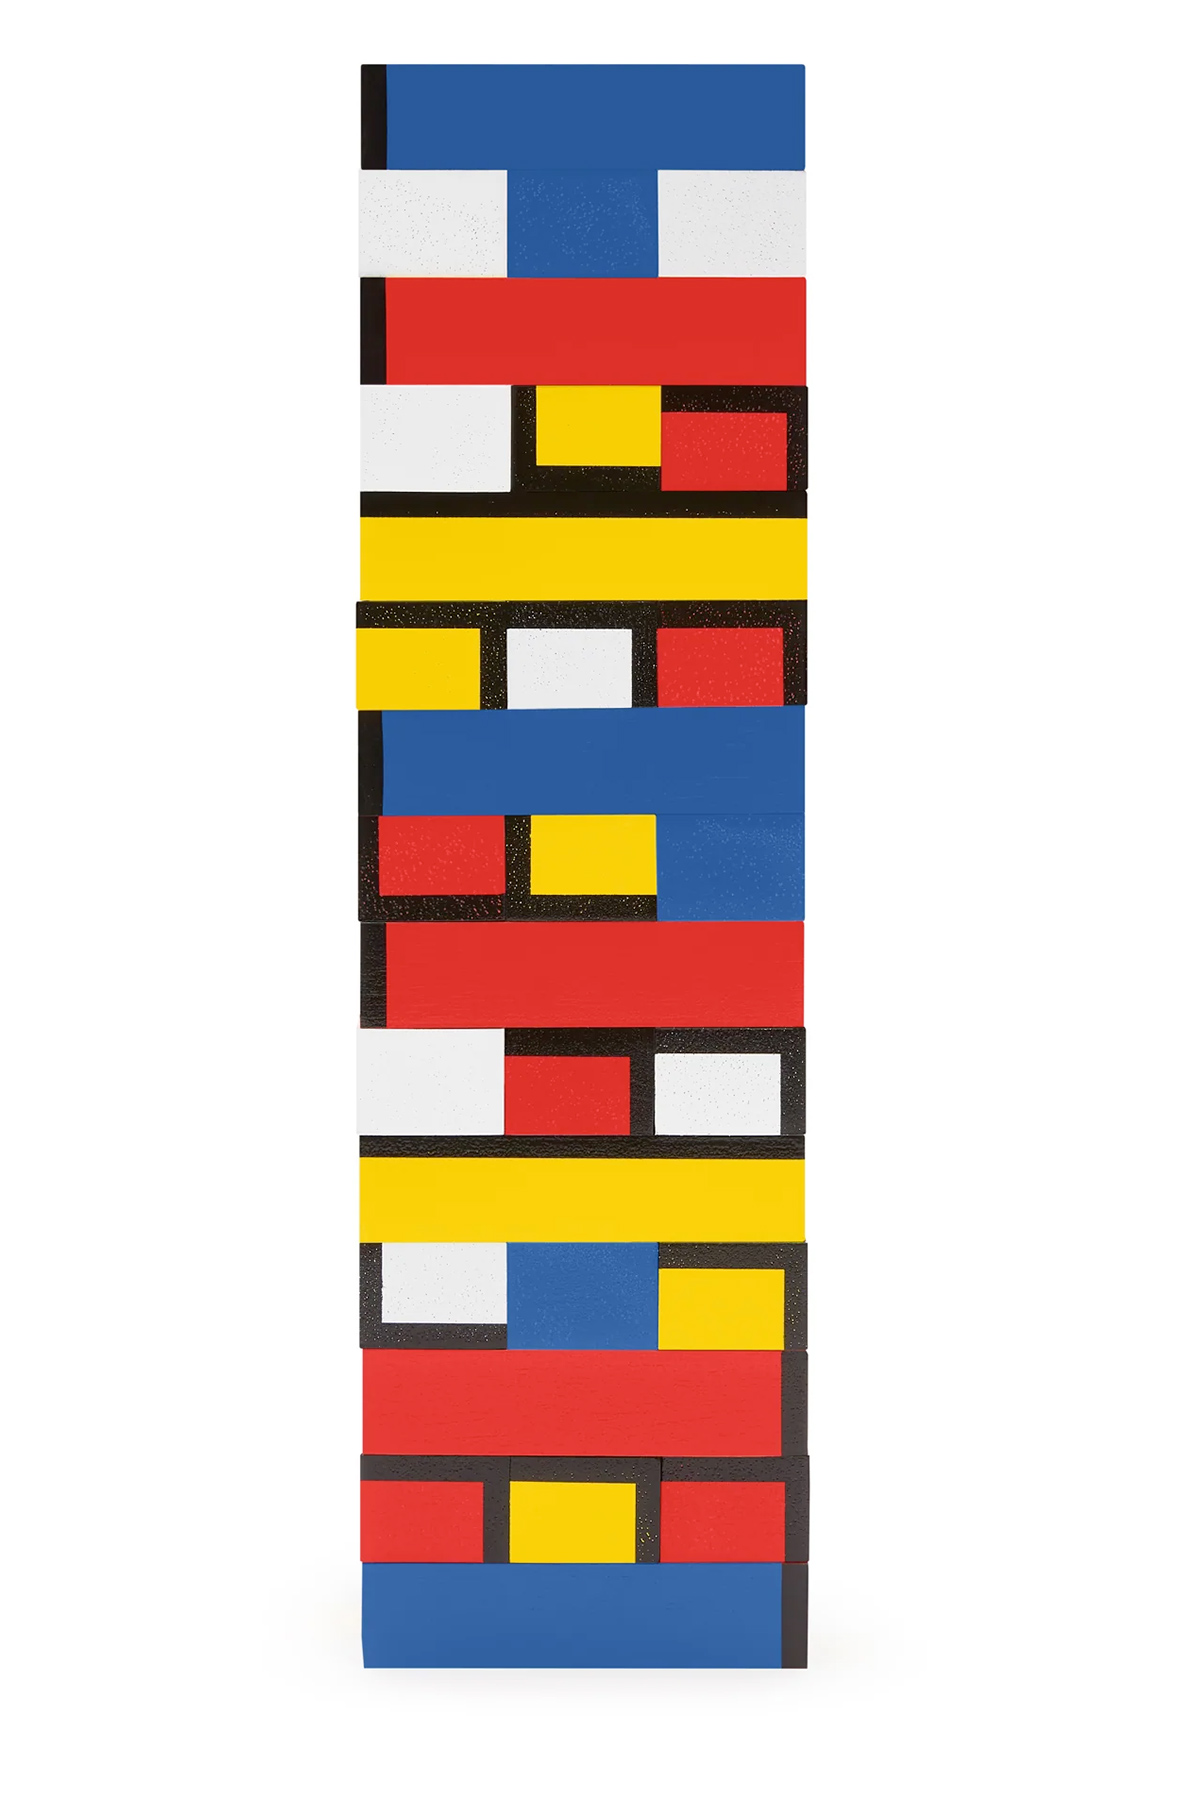 Stacking Game De Stijl Jenga in the Colorful Style of Piet Mondrian (MoMA)